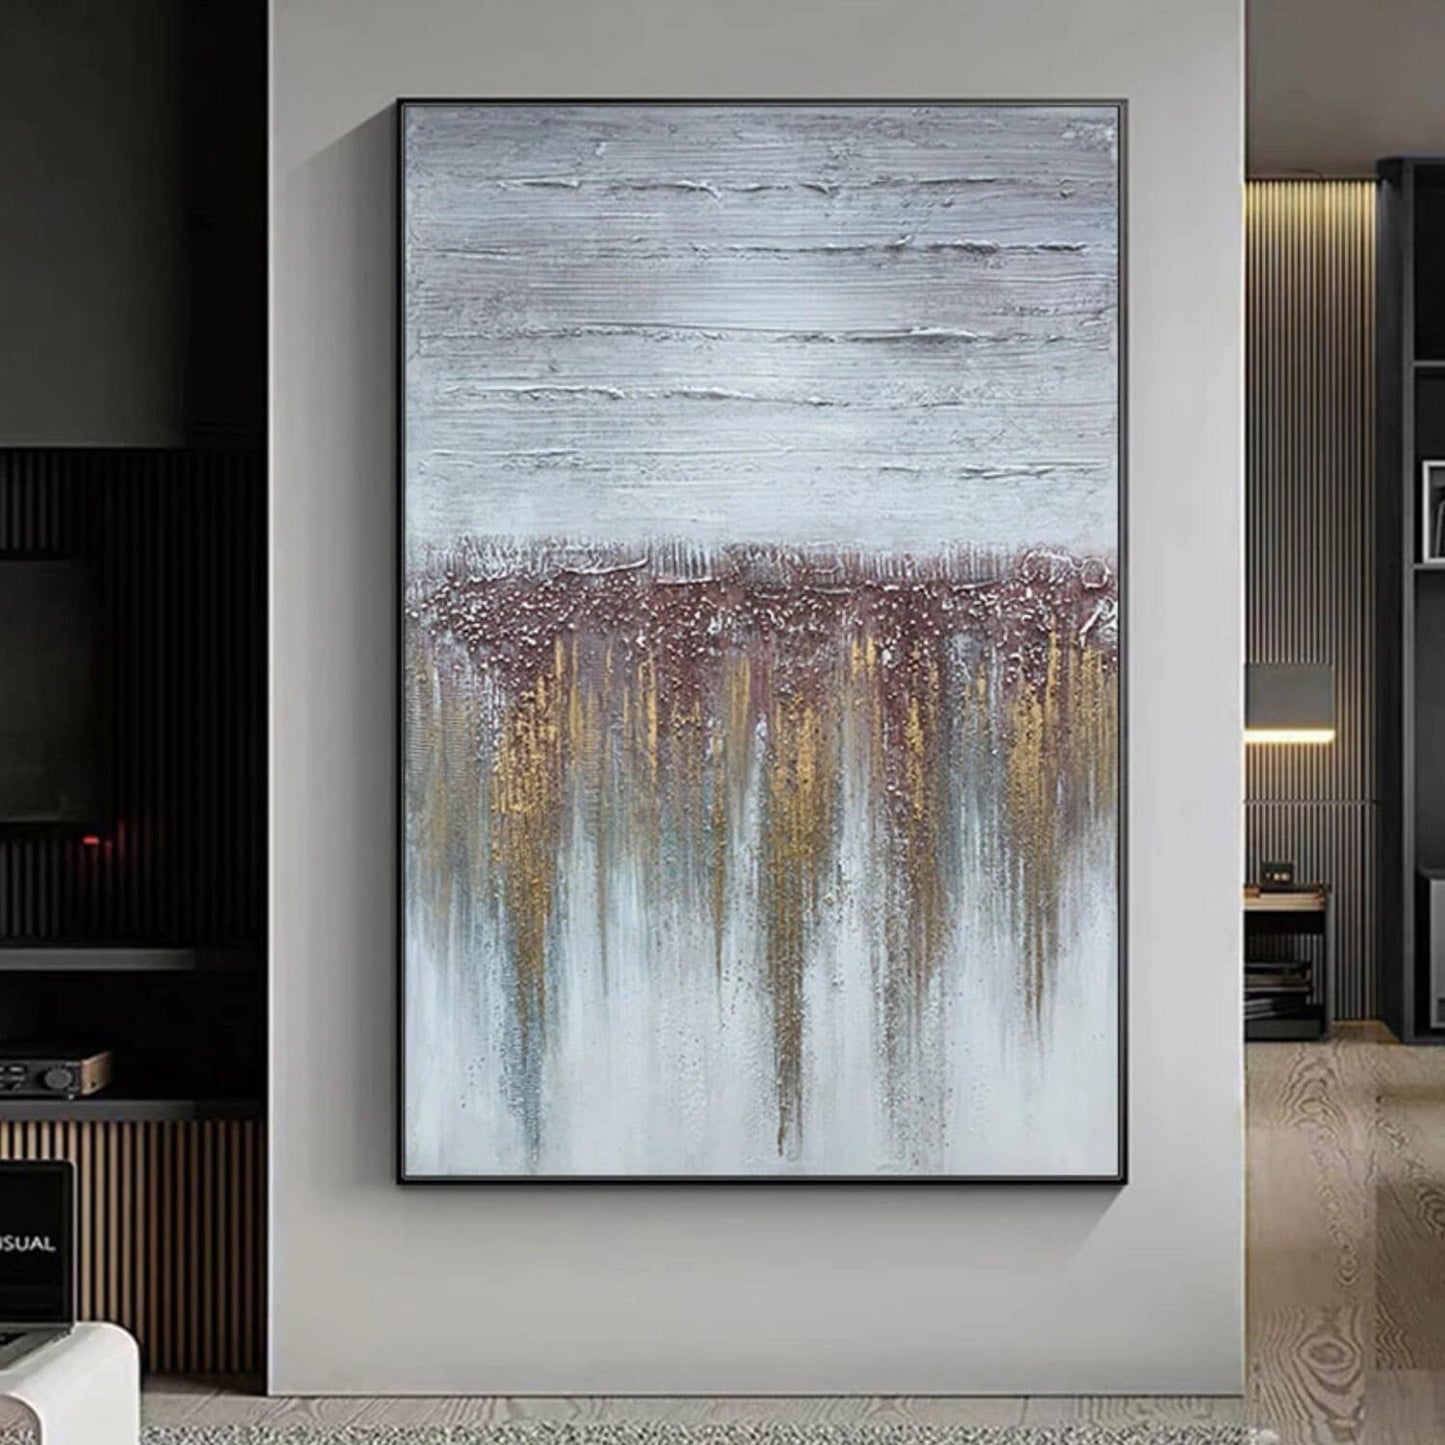 Textured Landscape Wall Hanging Acrylic Painting